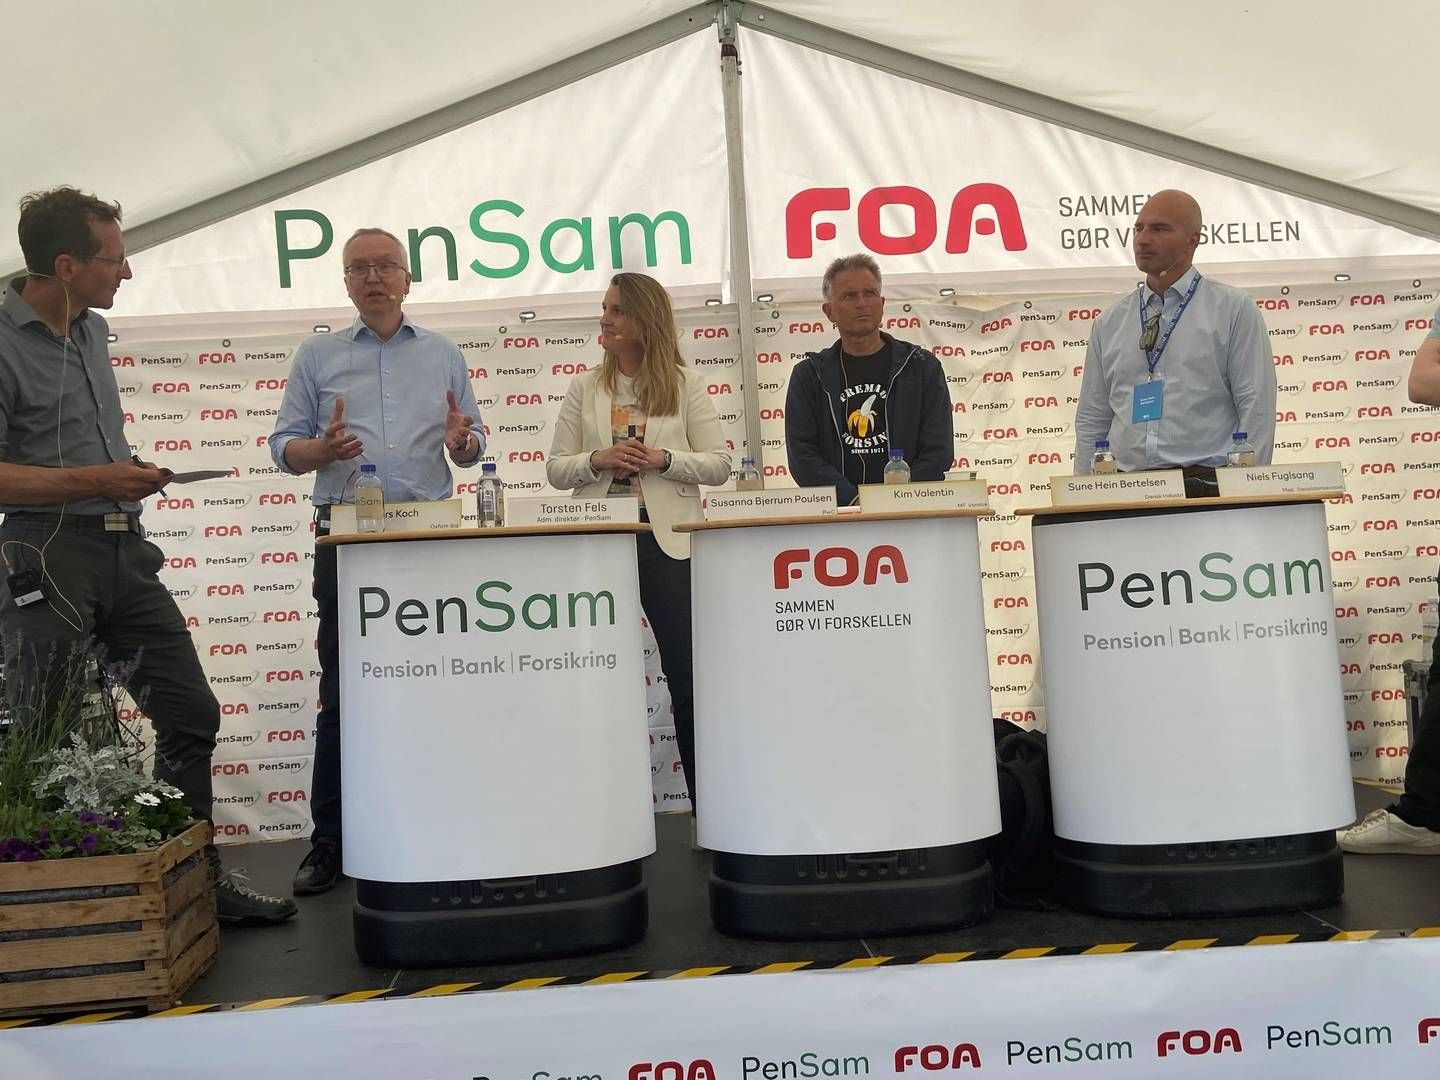 Torsten Fels (second from left) participated in a debate about fair taxation arranged by PenSam at the Danish democracy festival Folkemødet. | Photo: Anne Louise Houmann